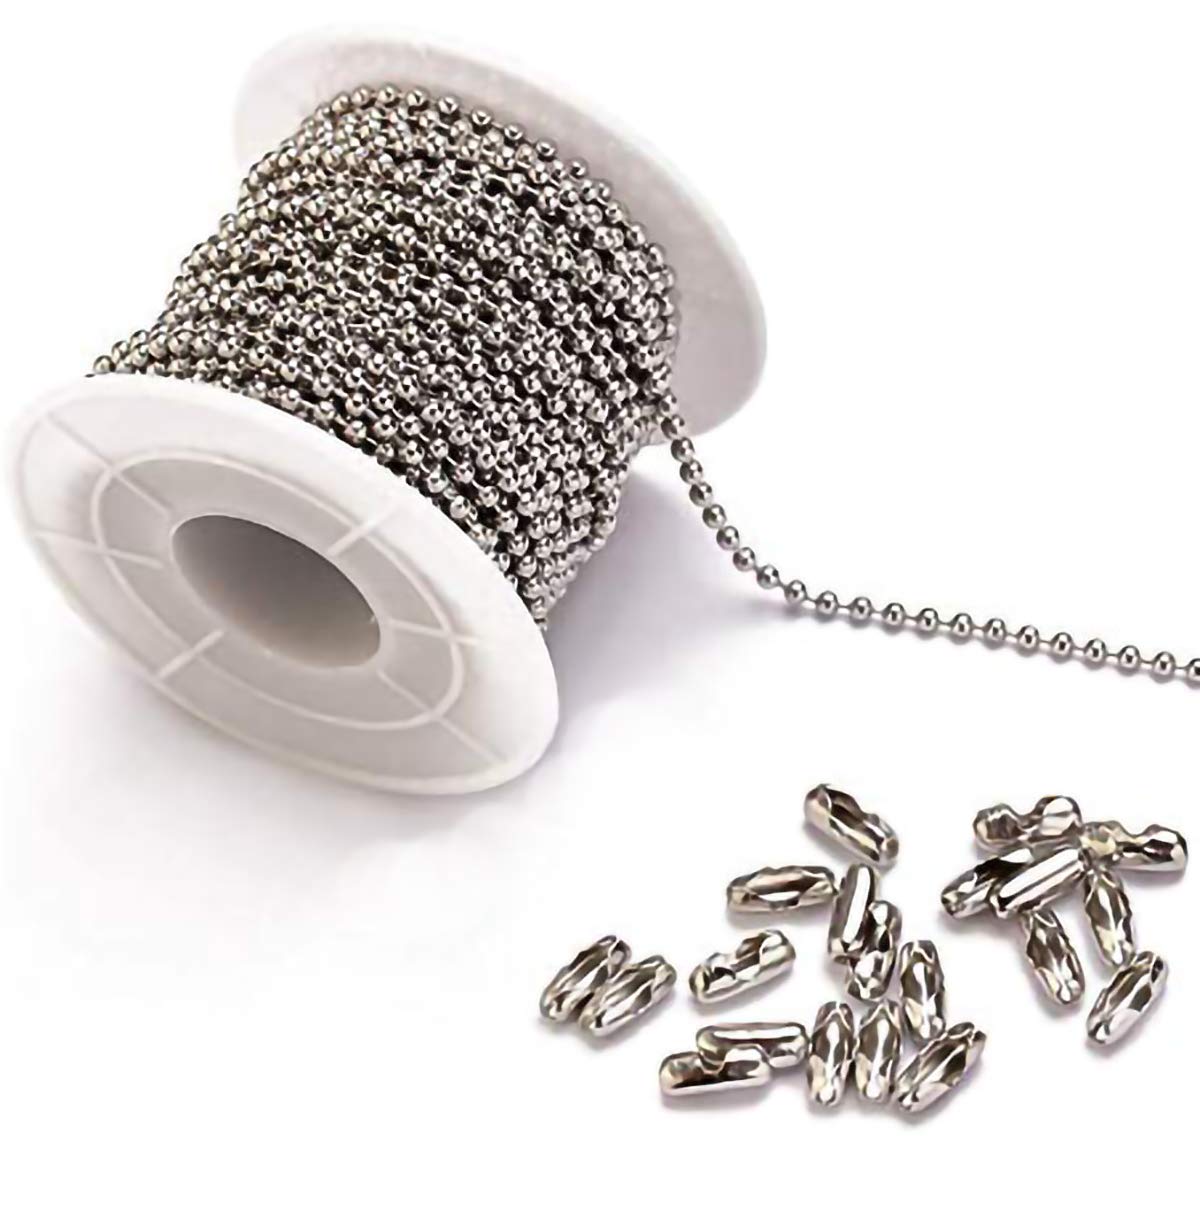 10 Foot Length Ball Chain, Number 10 Size, Stainless Steel, & 10 Matching  'B' Couplings